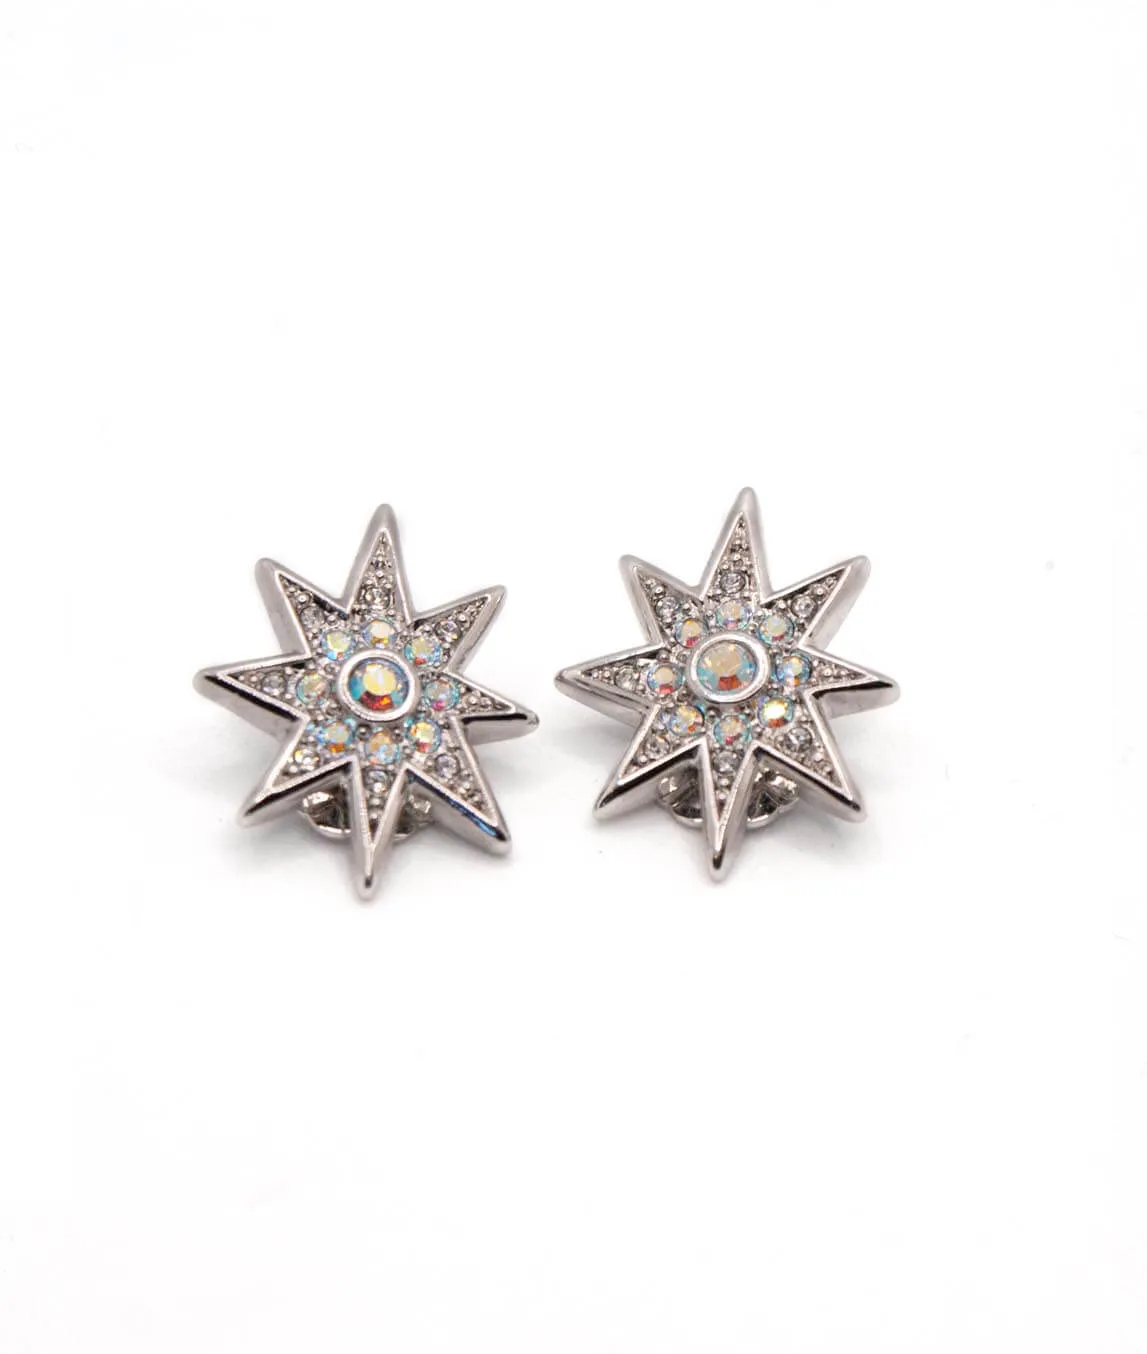 Christian Dior sparkly silver star earrings